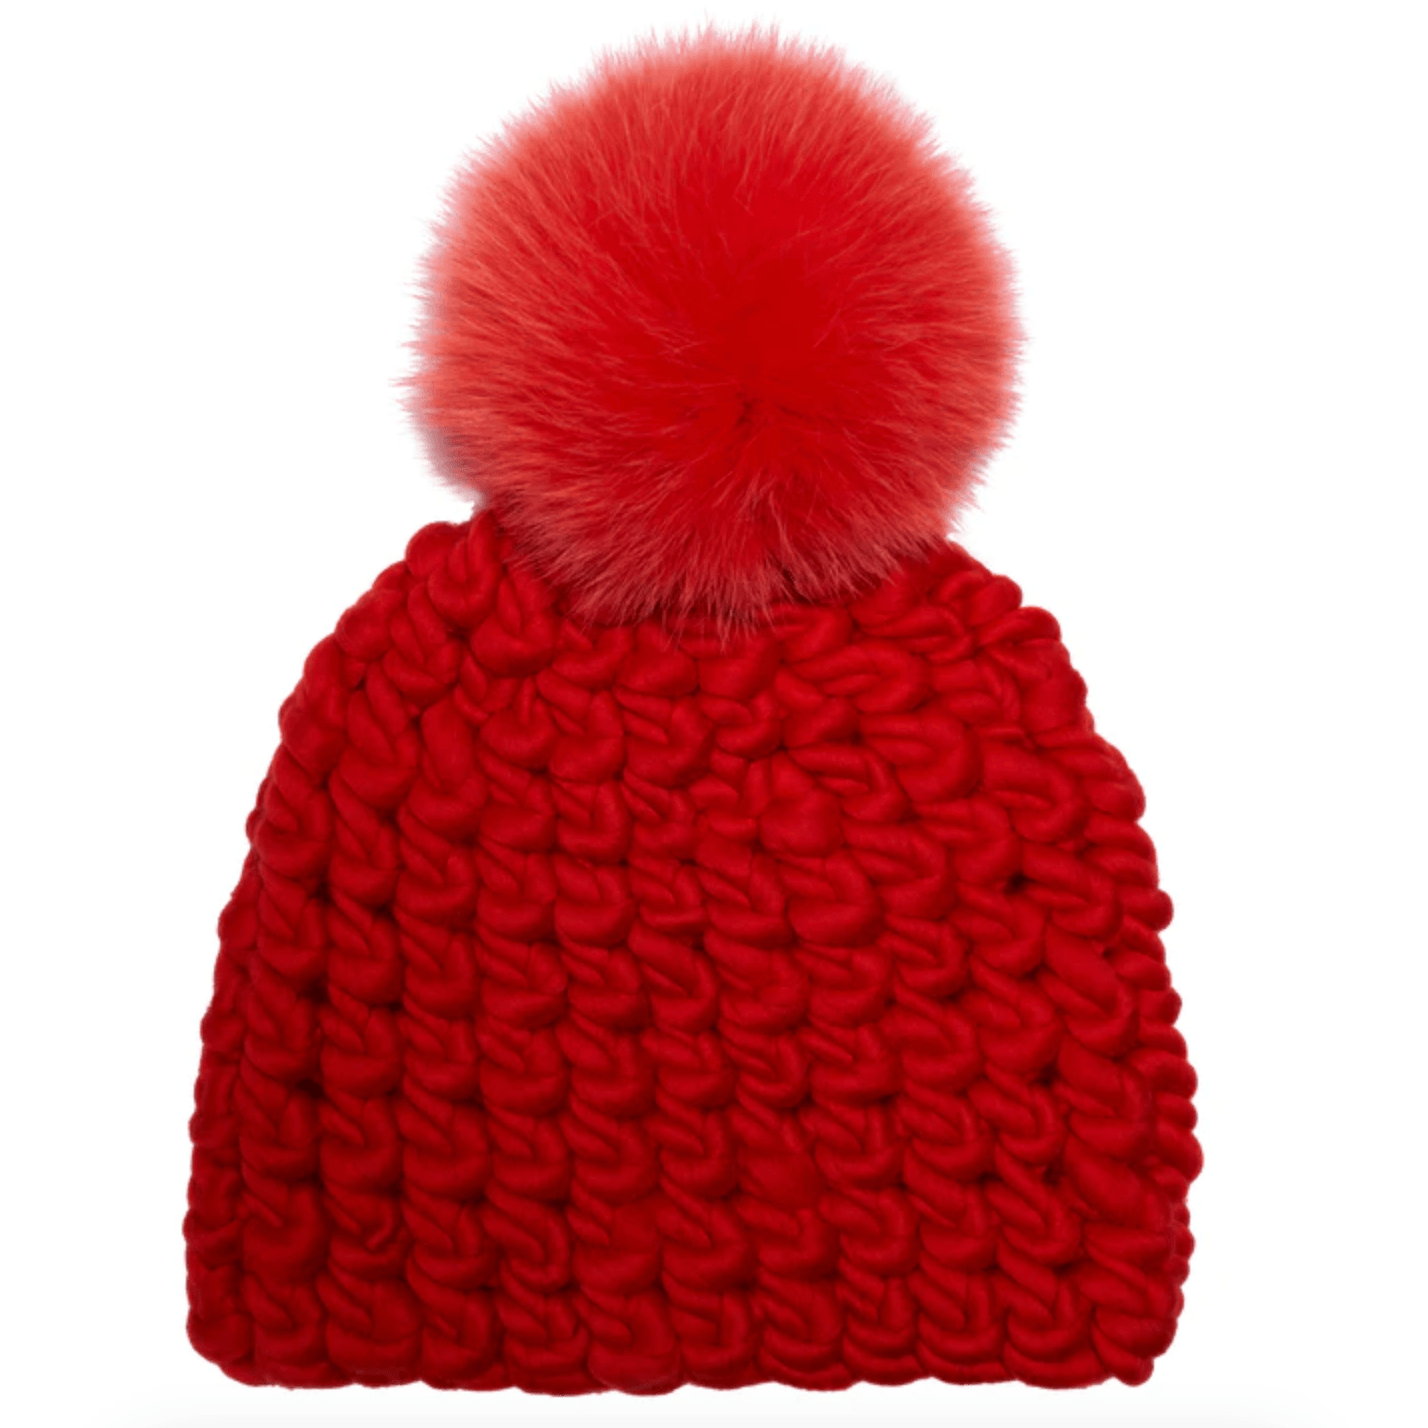 Pomster Beanie in Red Tomato by Mischa Lampert